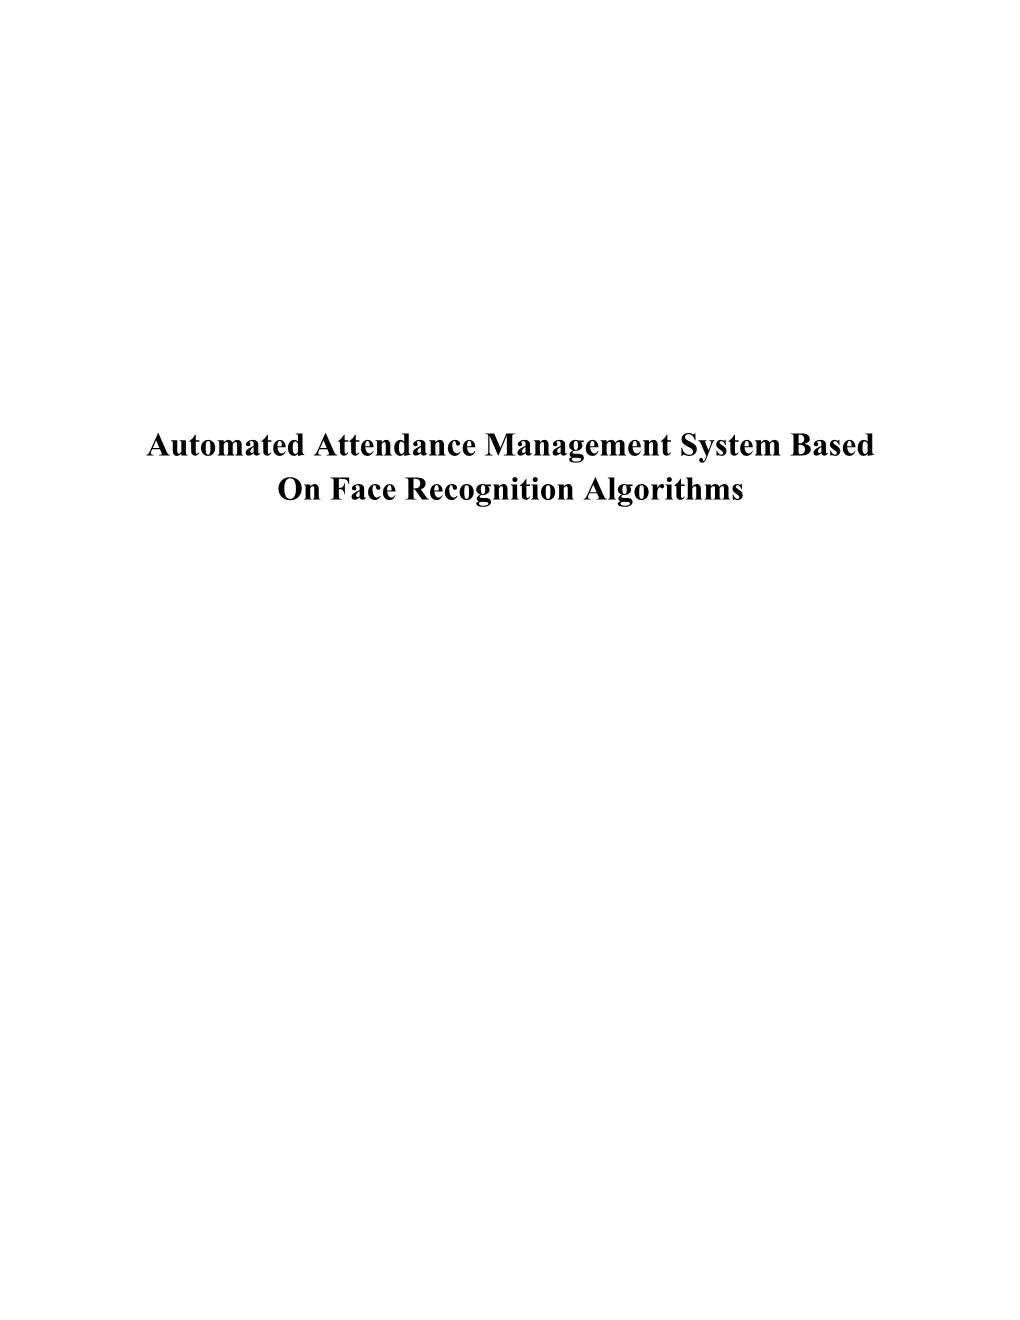 Automated Attendance Management System Based on Face Recognition Algorithms